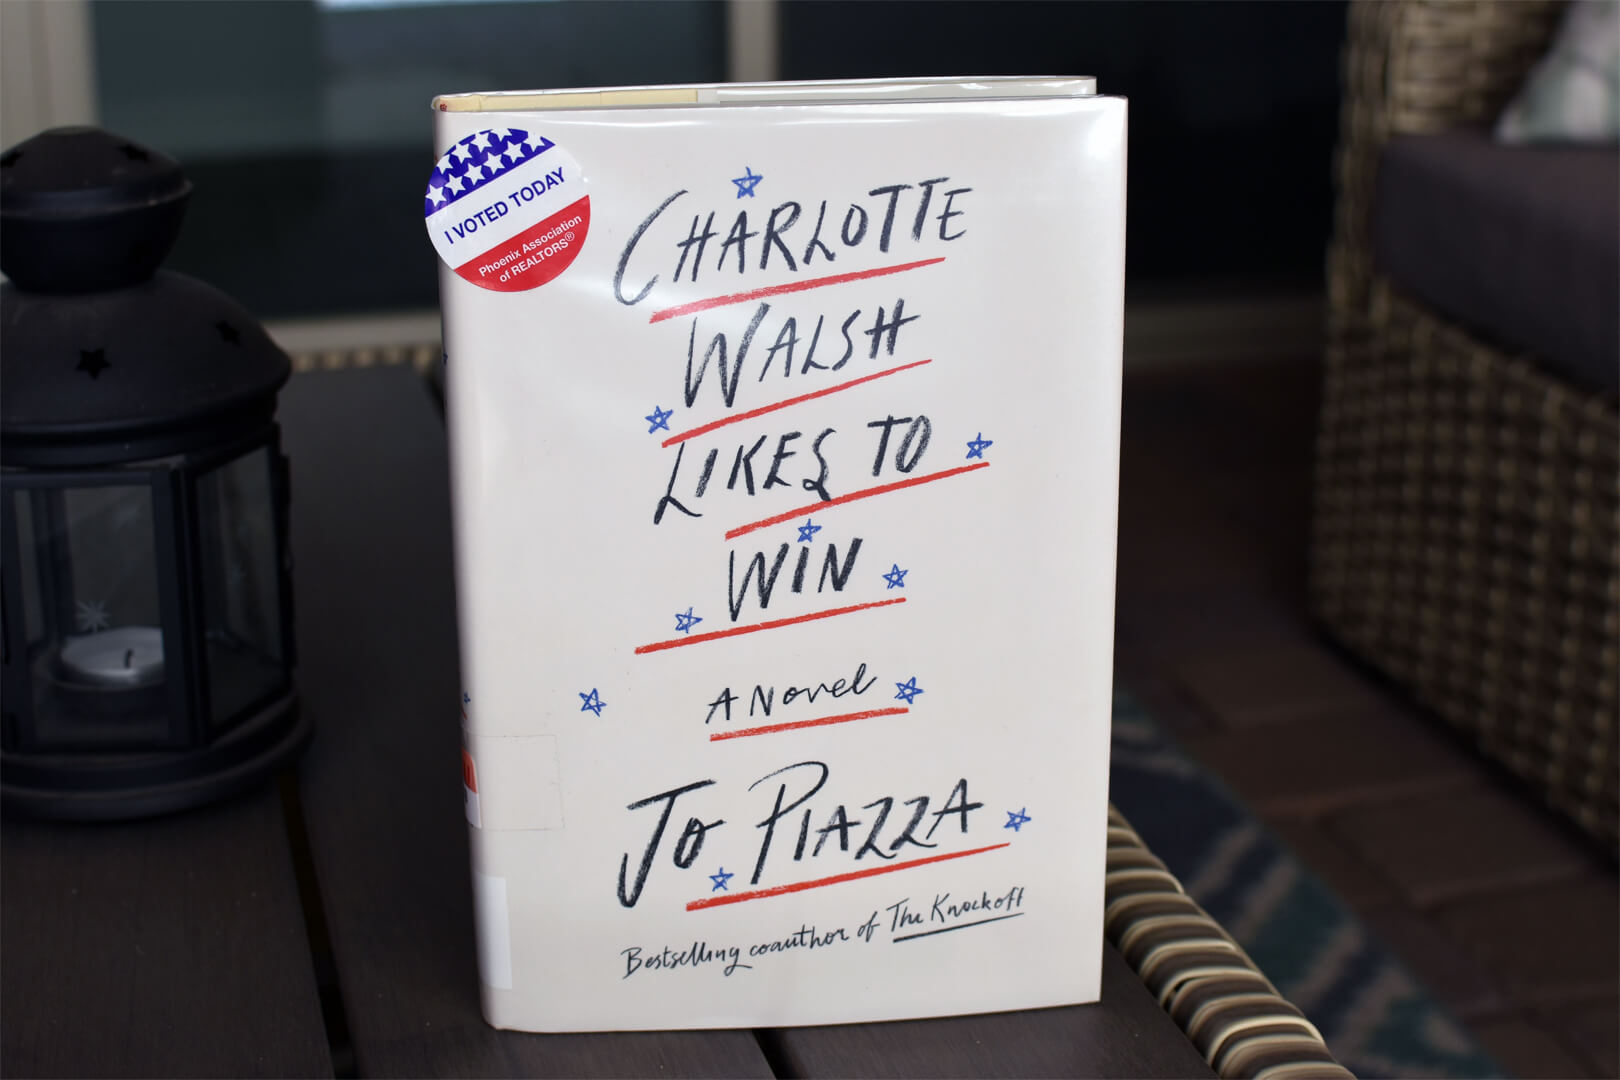 Review: Charlotte Walsh Likes To Win by Jo Piazza